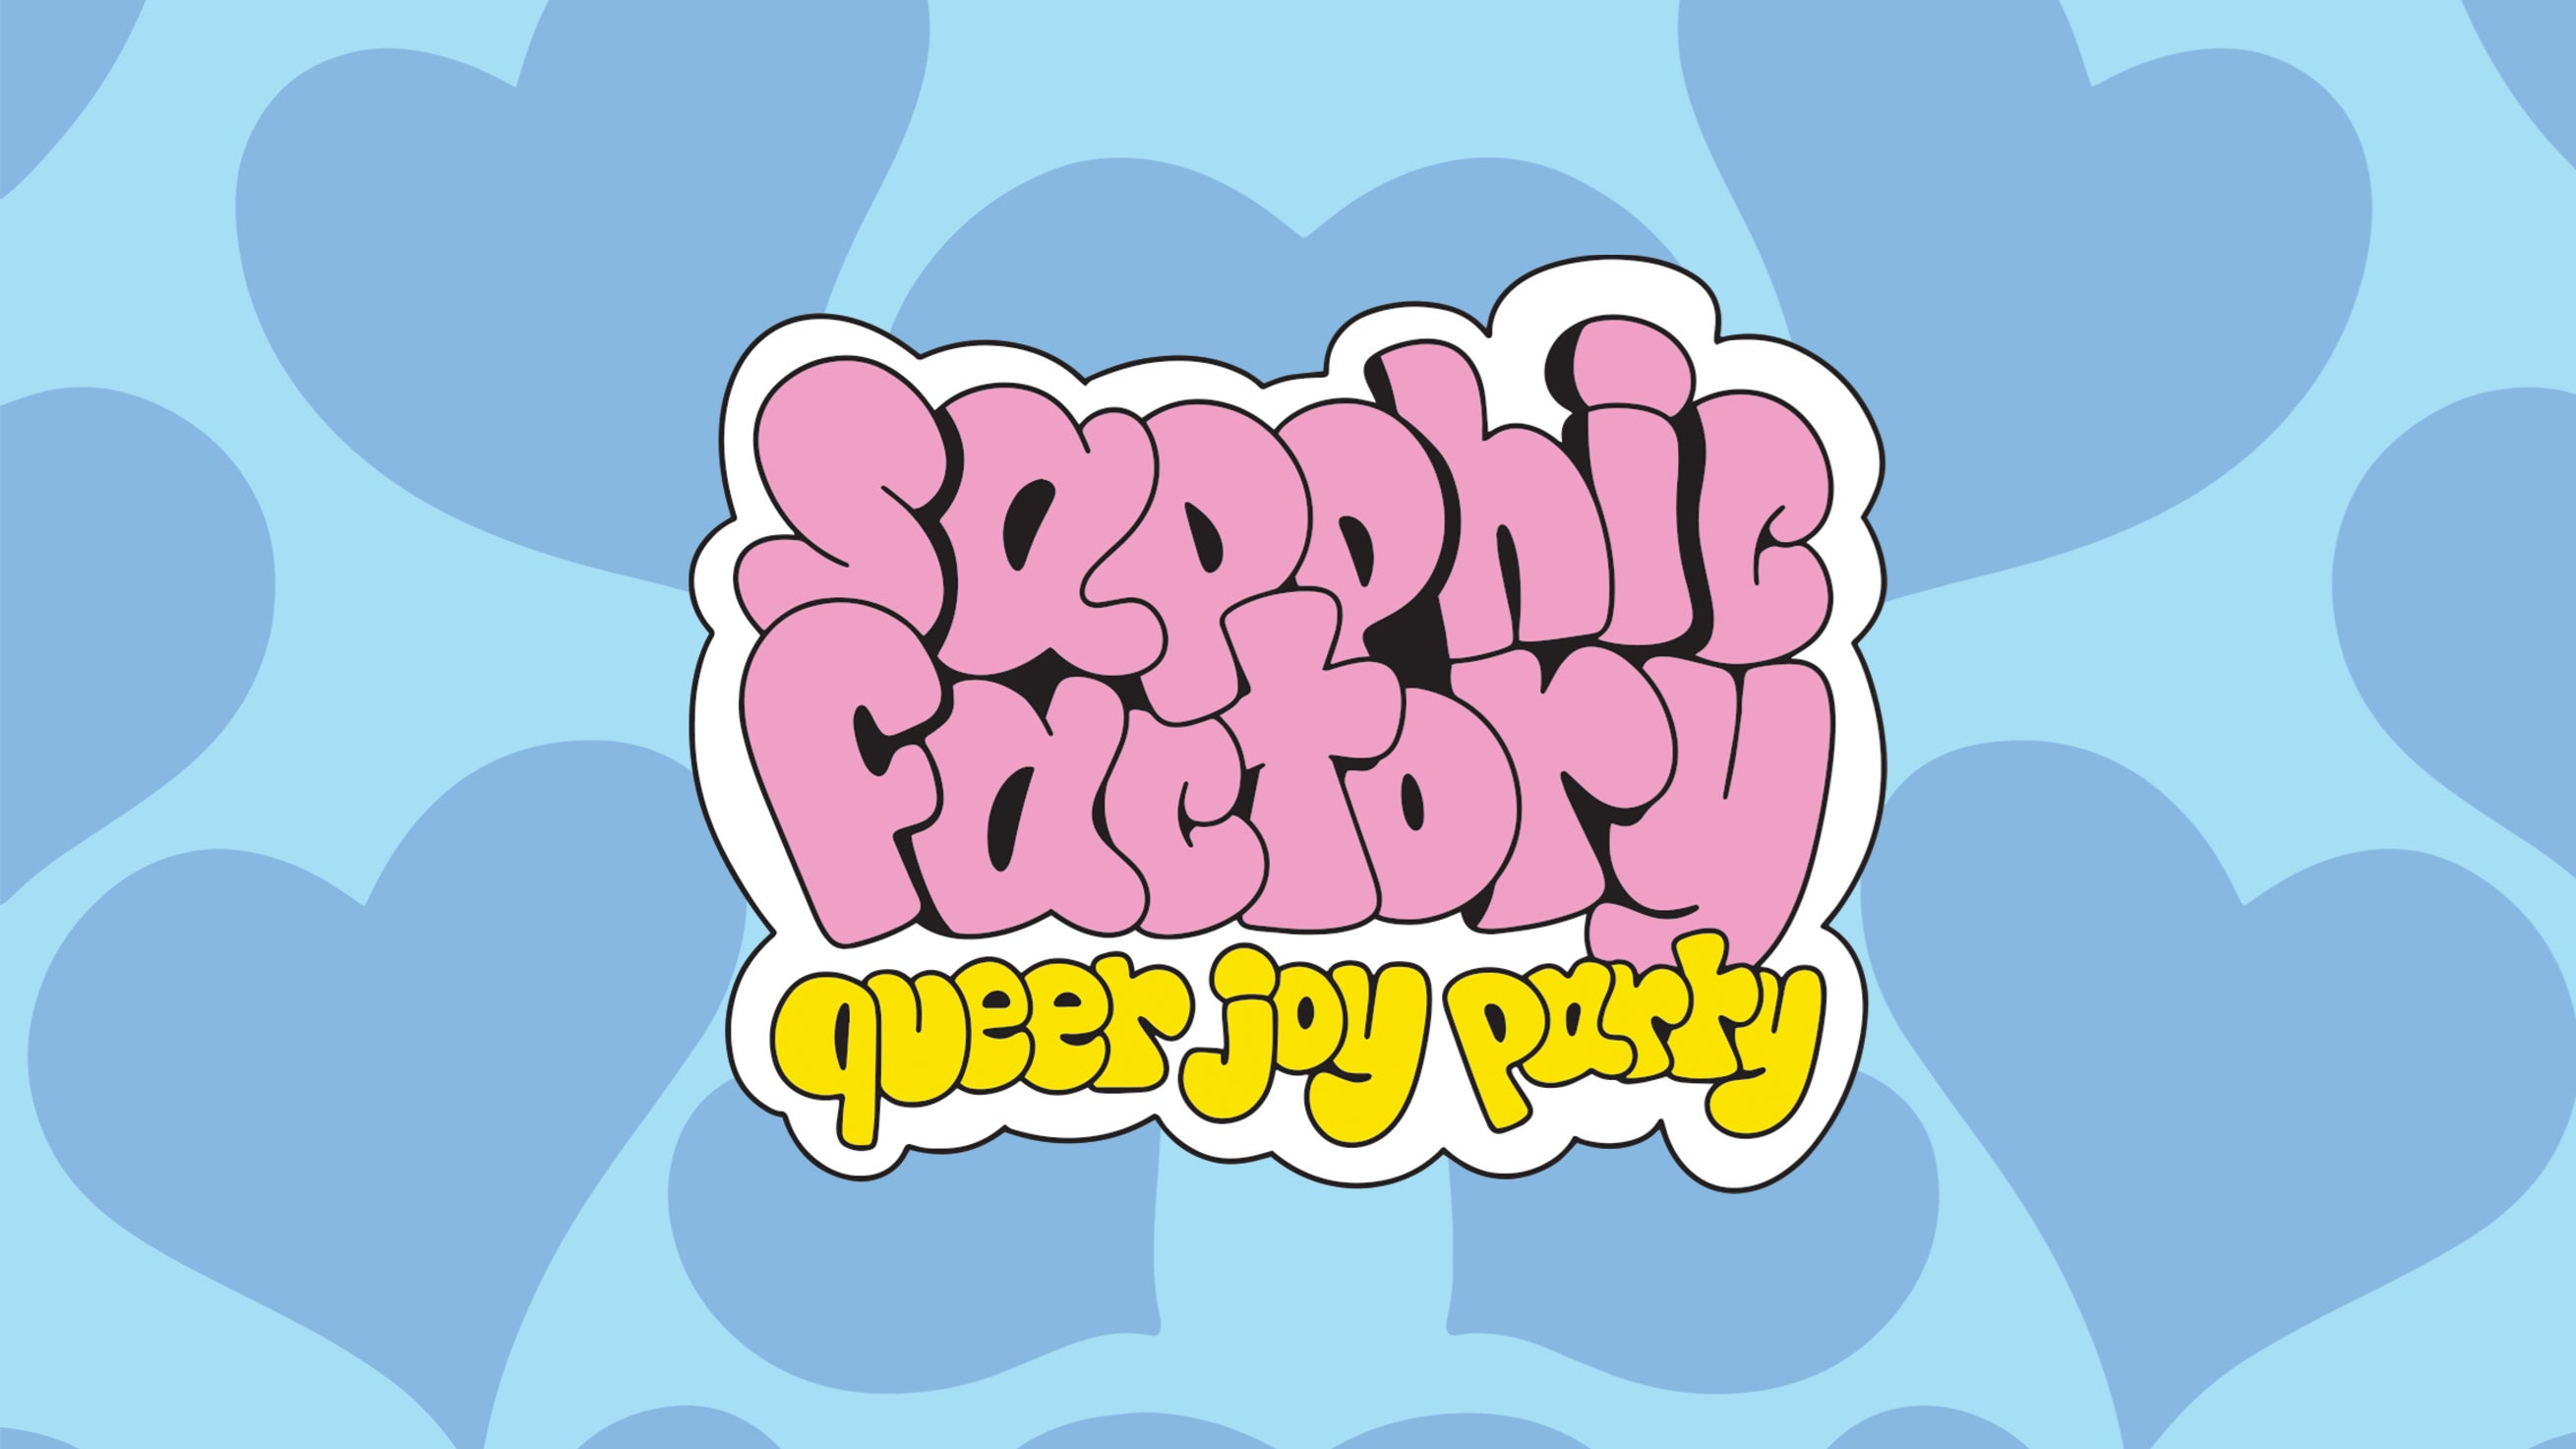 sapphic factory: queer joy party | 18+ in Atlanta promo photo for Artist presale offer code